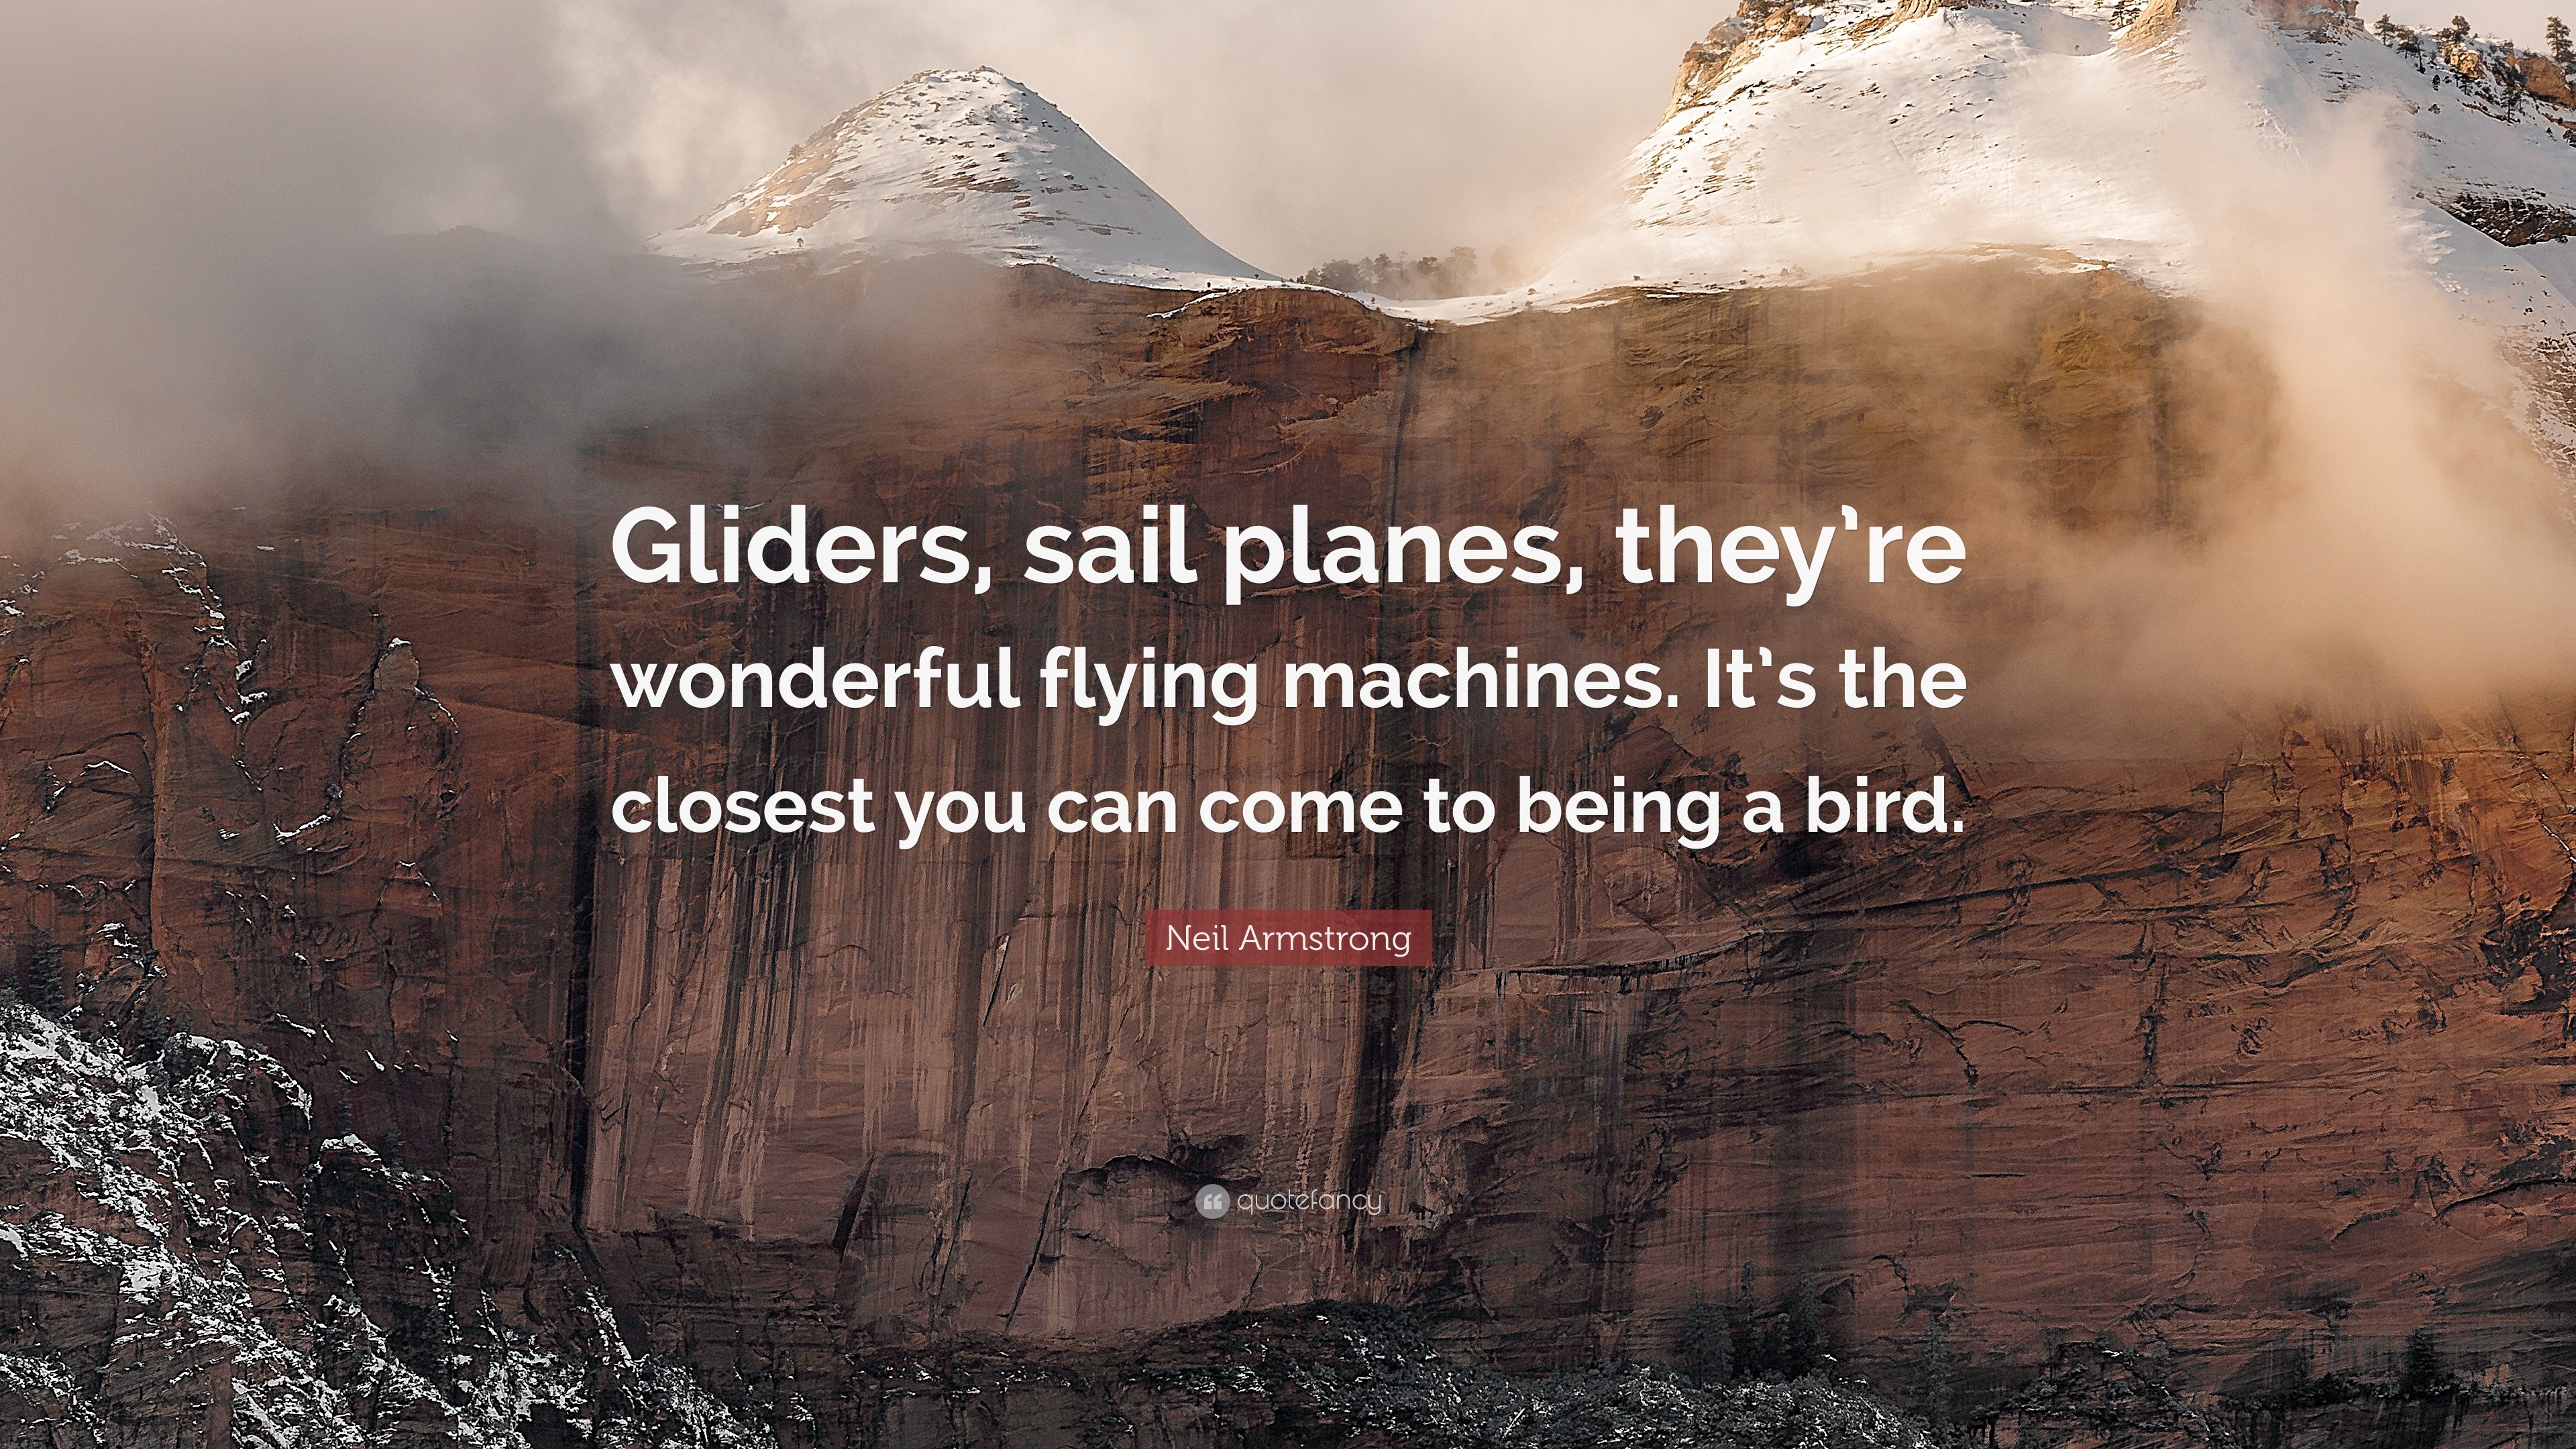 Neil Armstrong Quote: “Gliders, sail planes, they’re wonderful flying